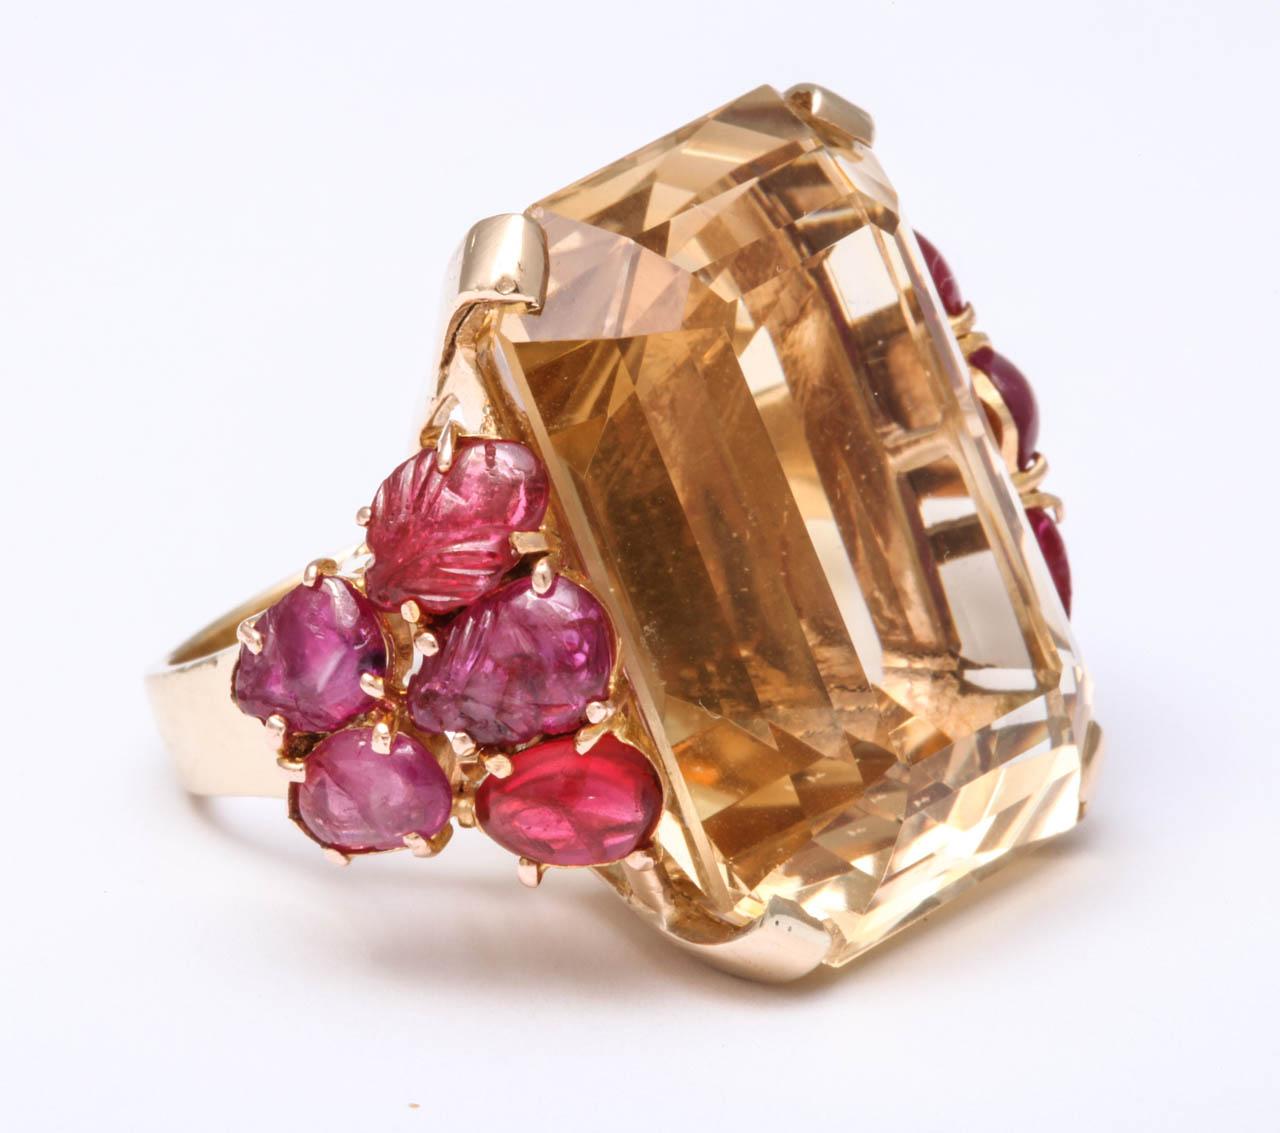 Impressive citrine and carved ruby ring, US size 7.25. Citrine weight is approx. 48ct. The weight is 26.3 grams.